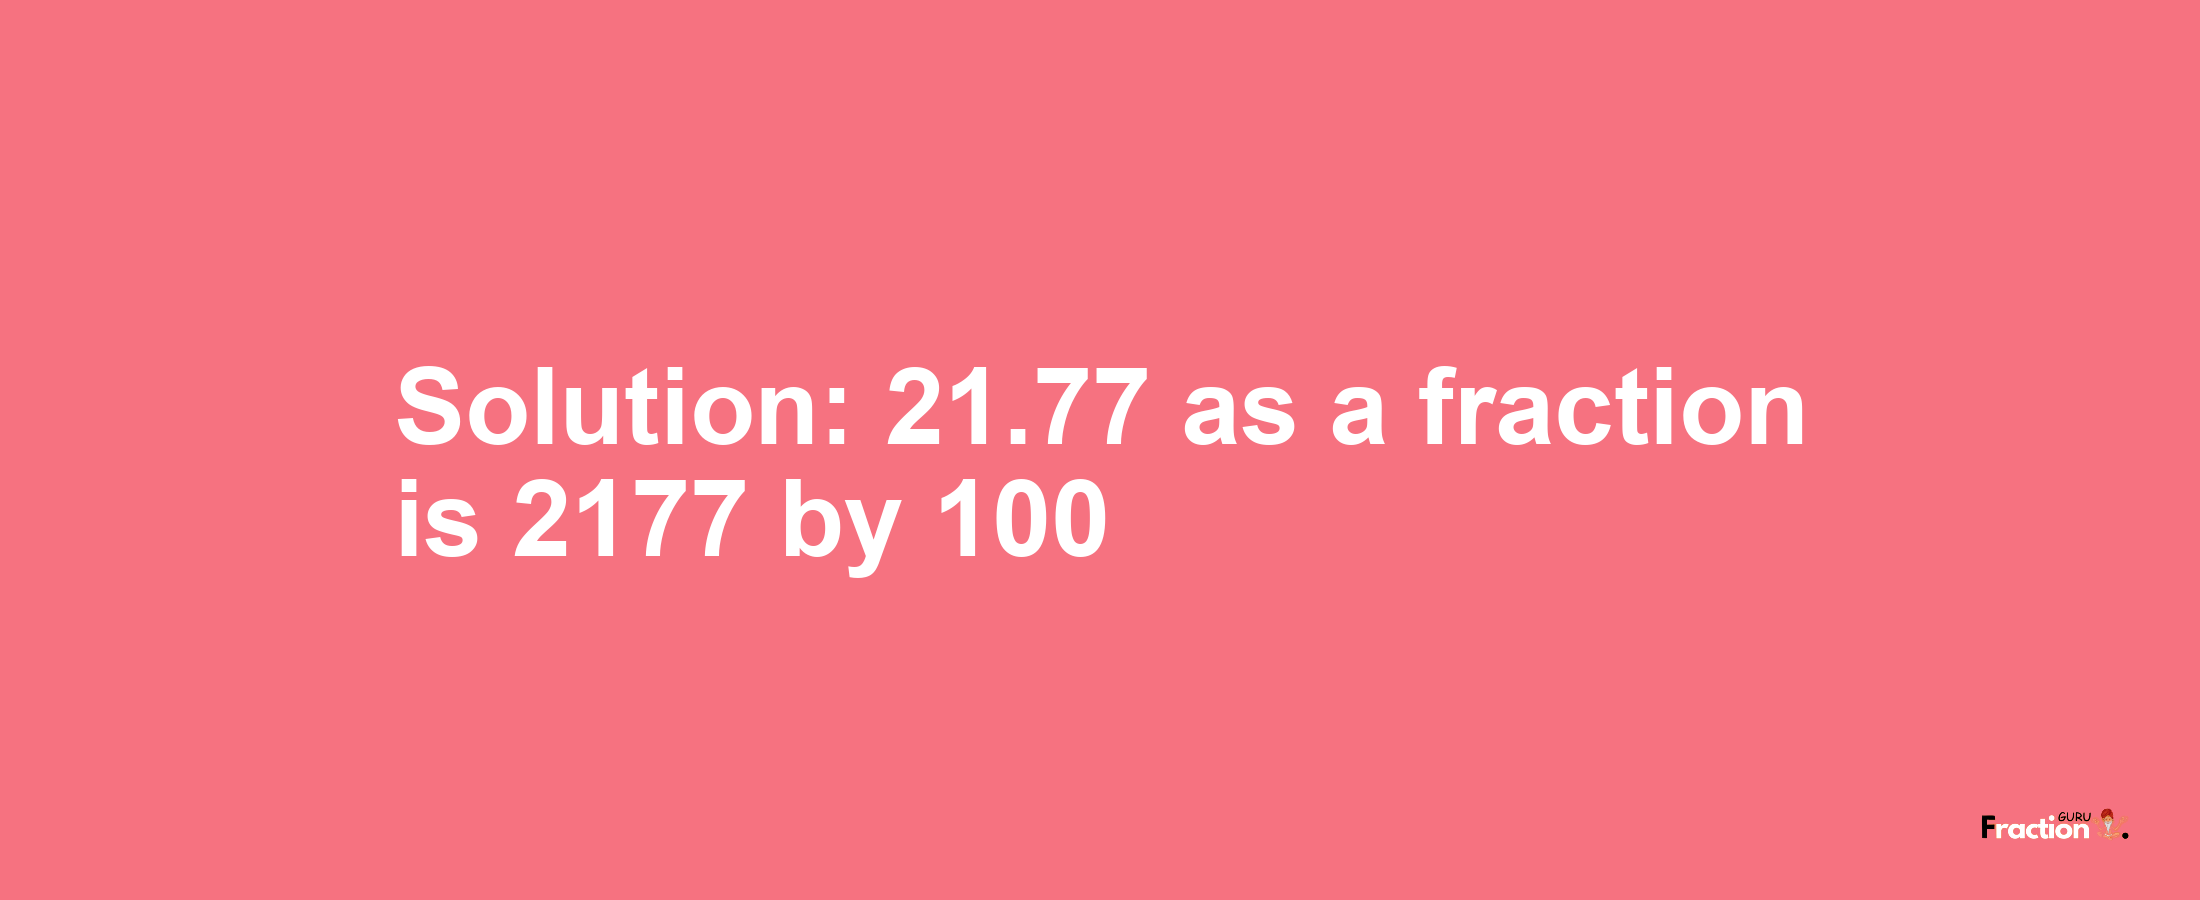 Solution:21.77 as a fraction is 2177/100